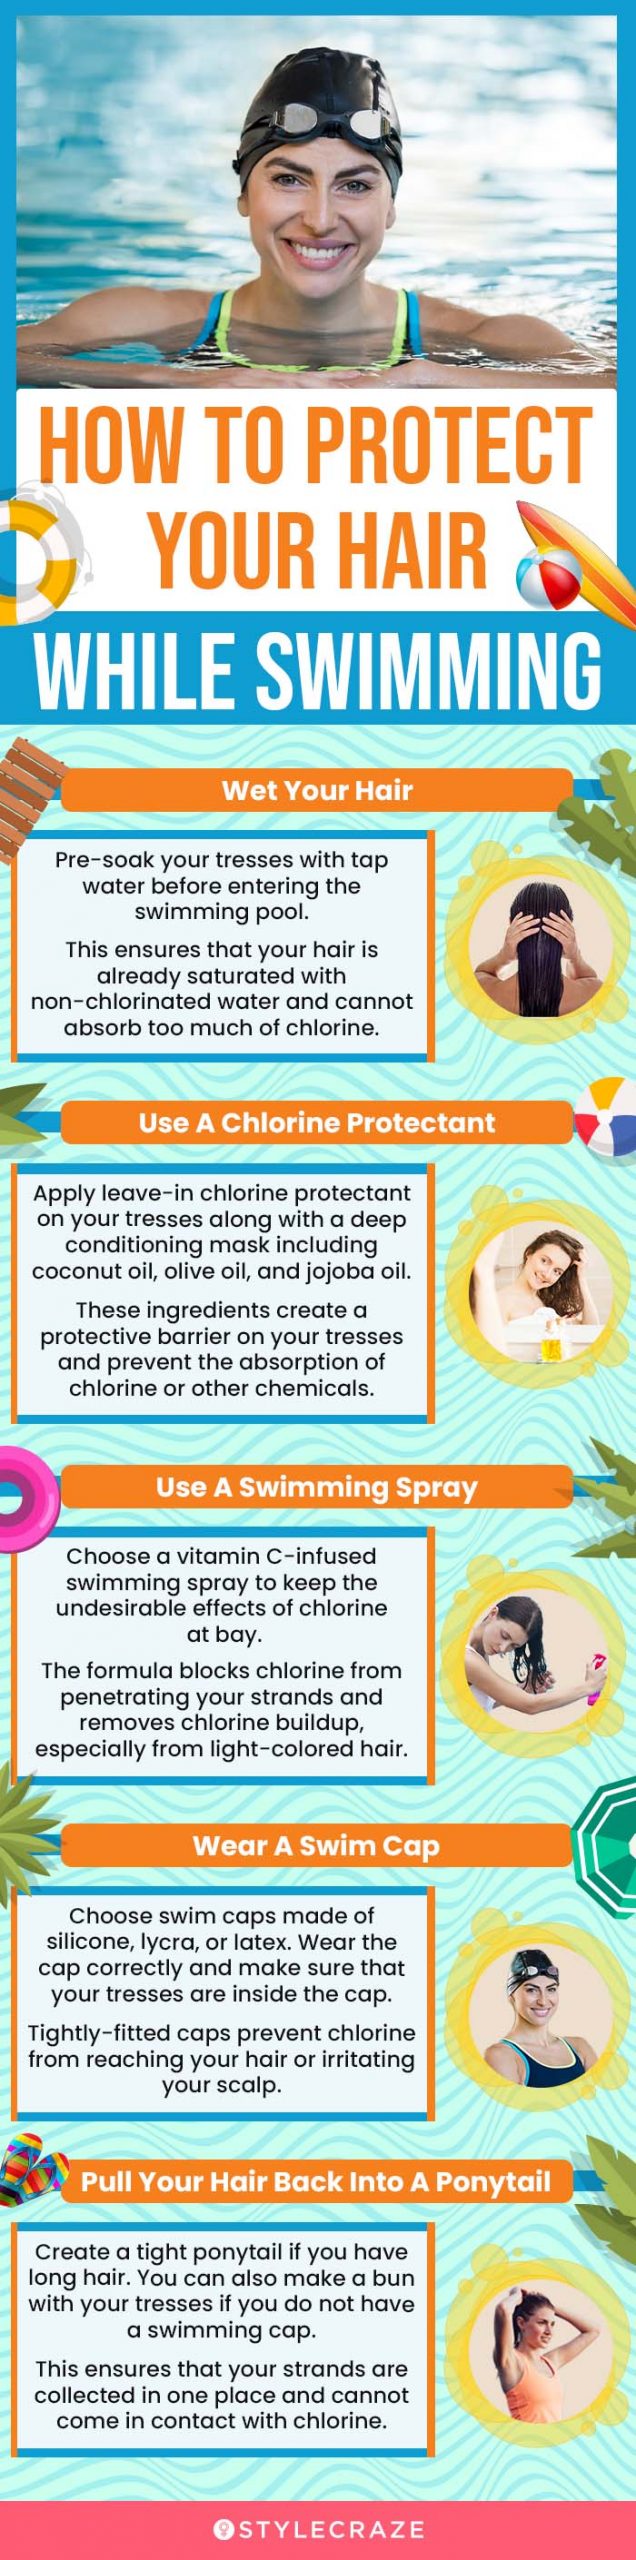 How To Protect Your Hair While Swimming (infographic)